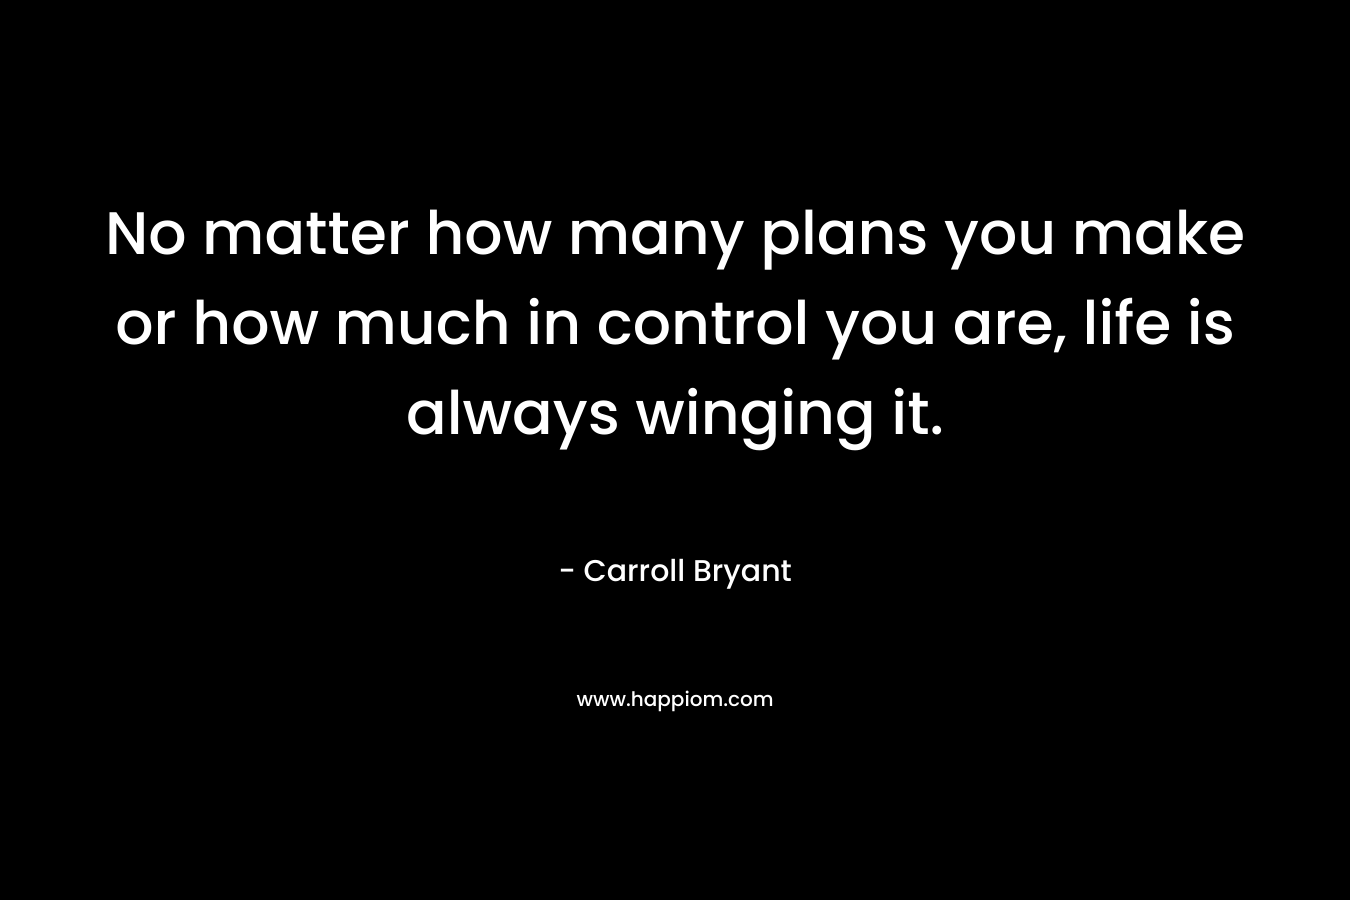 No matter how many plans you make or how much in control you are, life is always winging it.